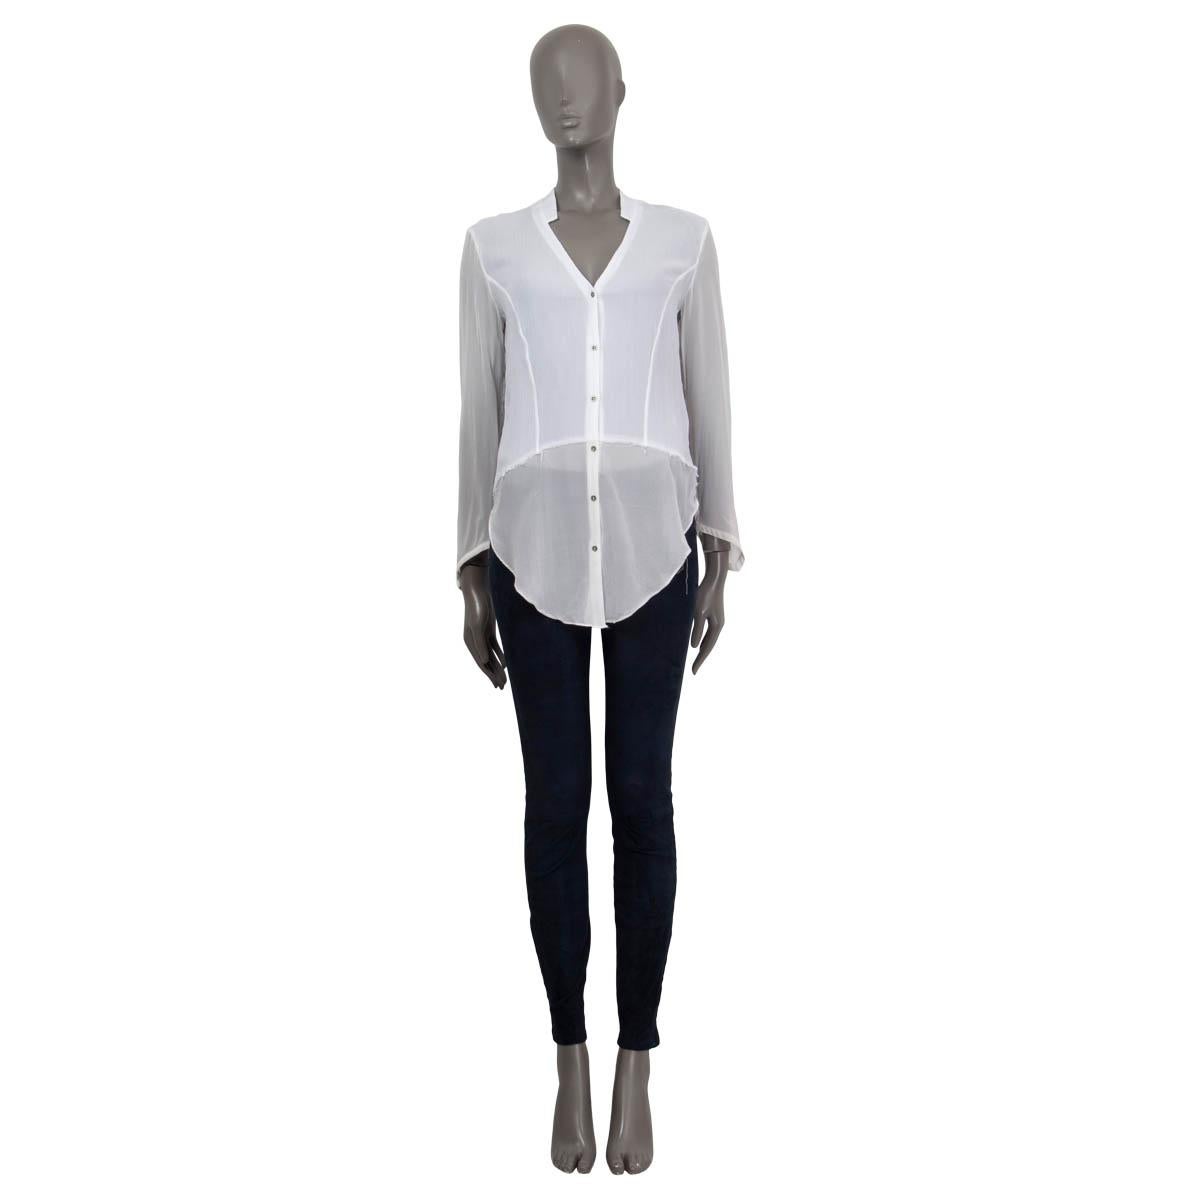 100% authentic Helmut Lang sheer crinkled button down shirt in white and off-white viscose (100%). Features buttoned cuffs, a asymmetric hemline and a v-neck. Opens with six silver metal buttons on the front. Unlined. Has been worn and is in